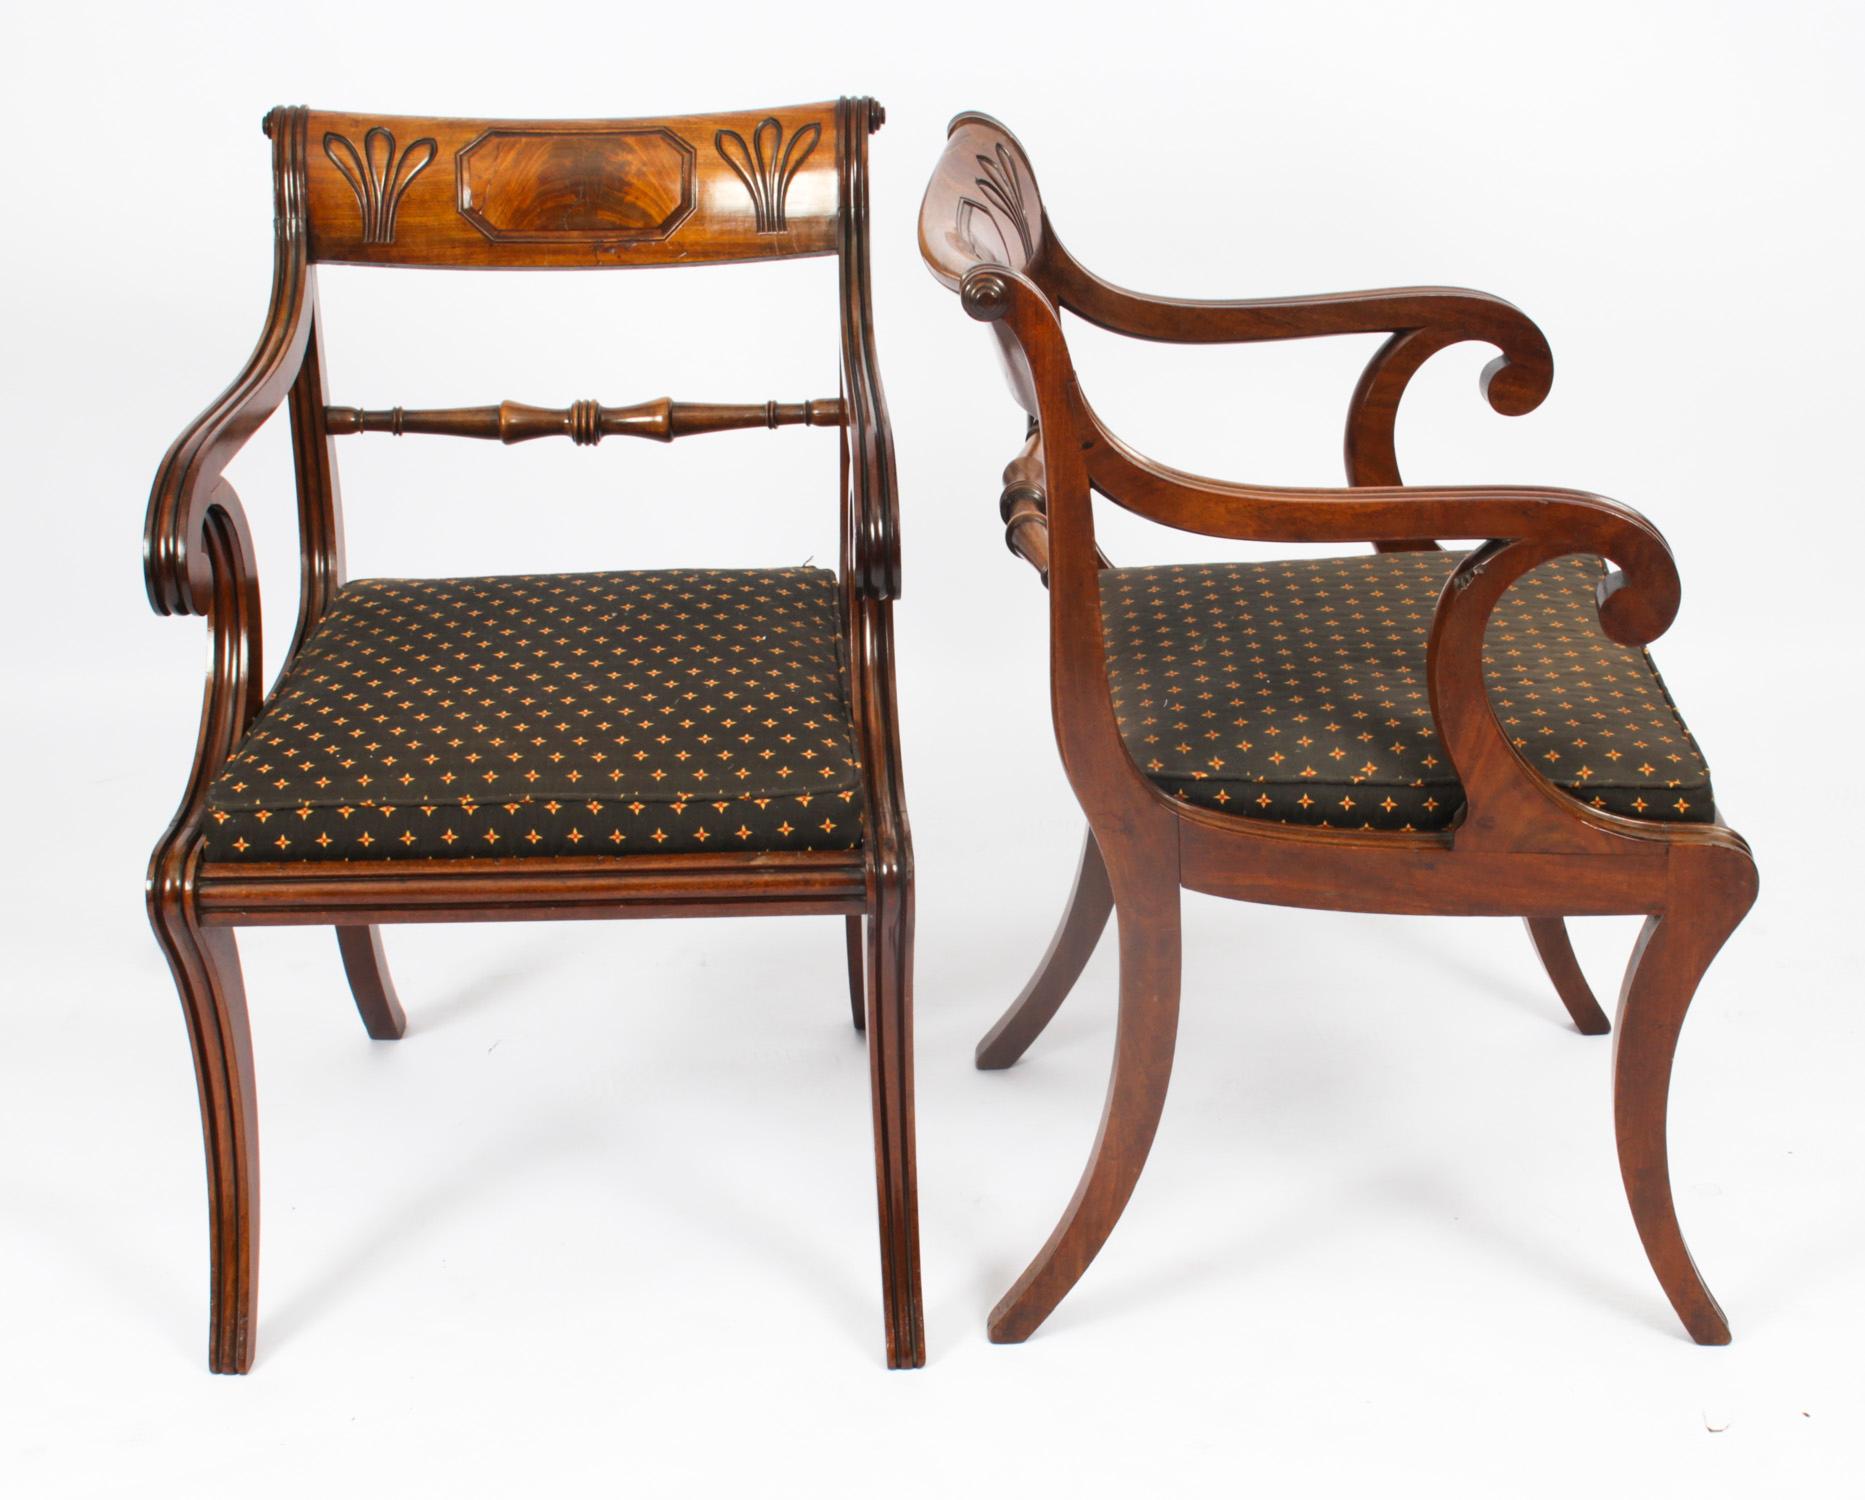 A fabulous set of ten Scottish Regency Period mahogany dining chairs, Circa 1815 in date.
The set comprising eight side chairs and two armchairs, each with a curved, dished and scrolled toprail with a central raised octagonal tablet flanked by